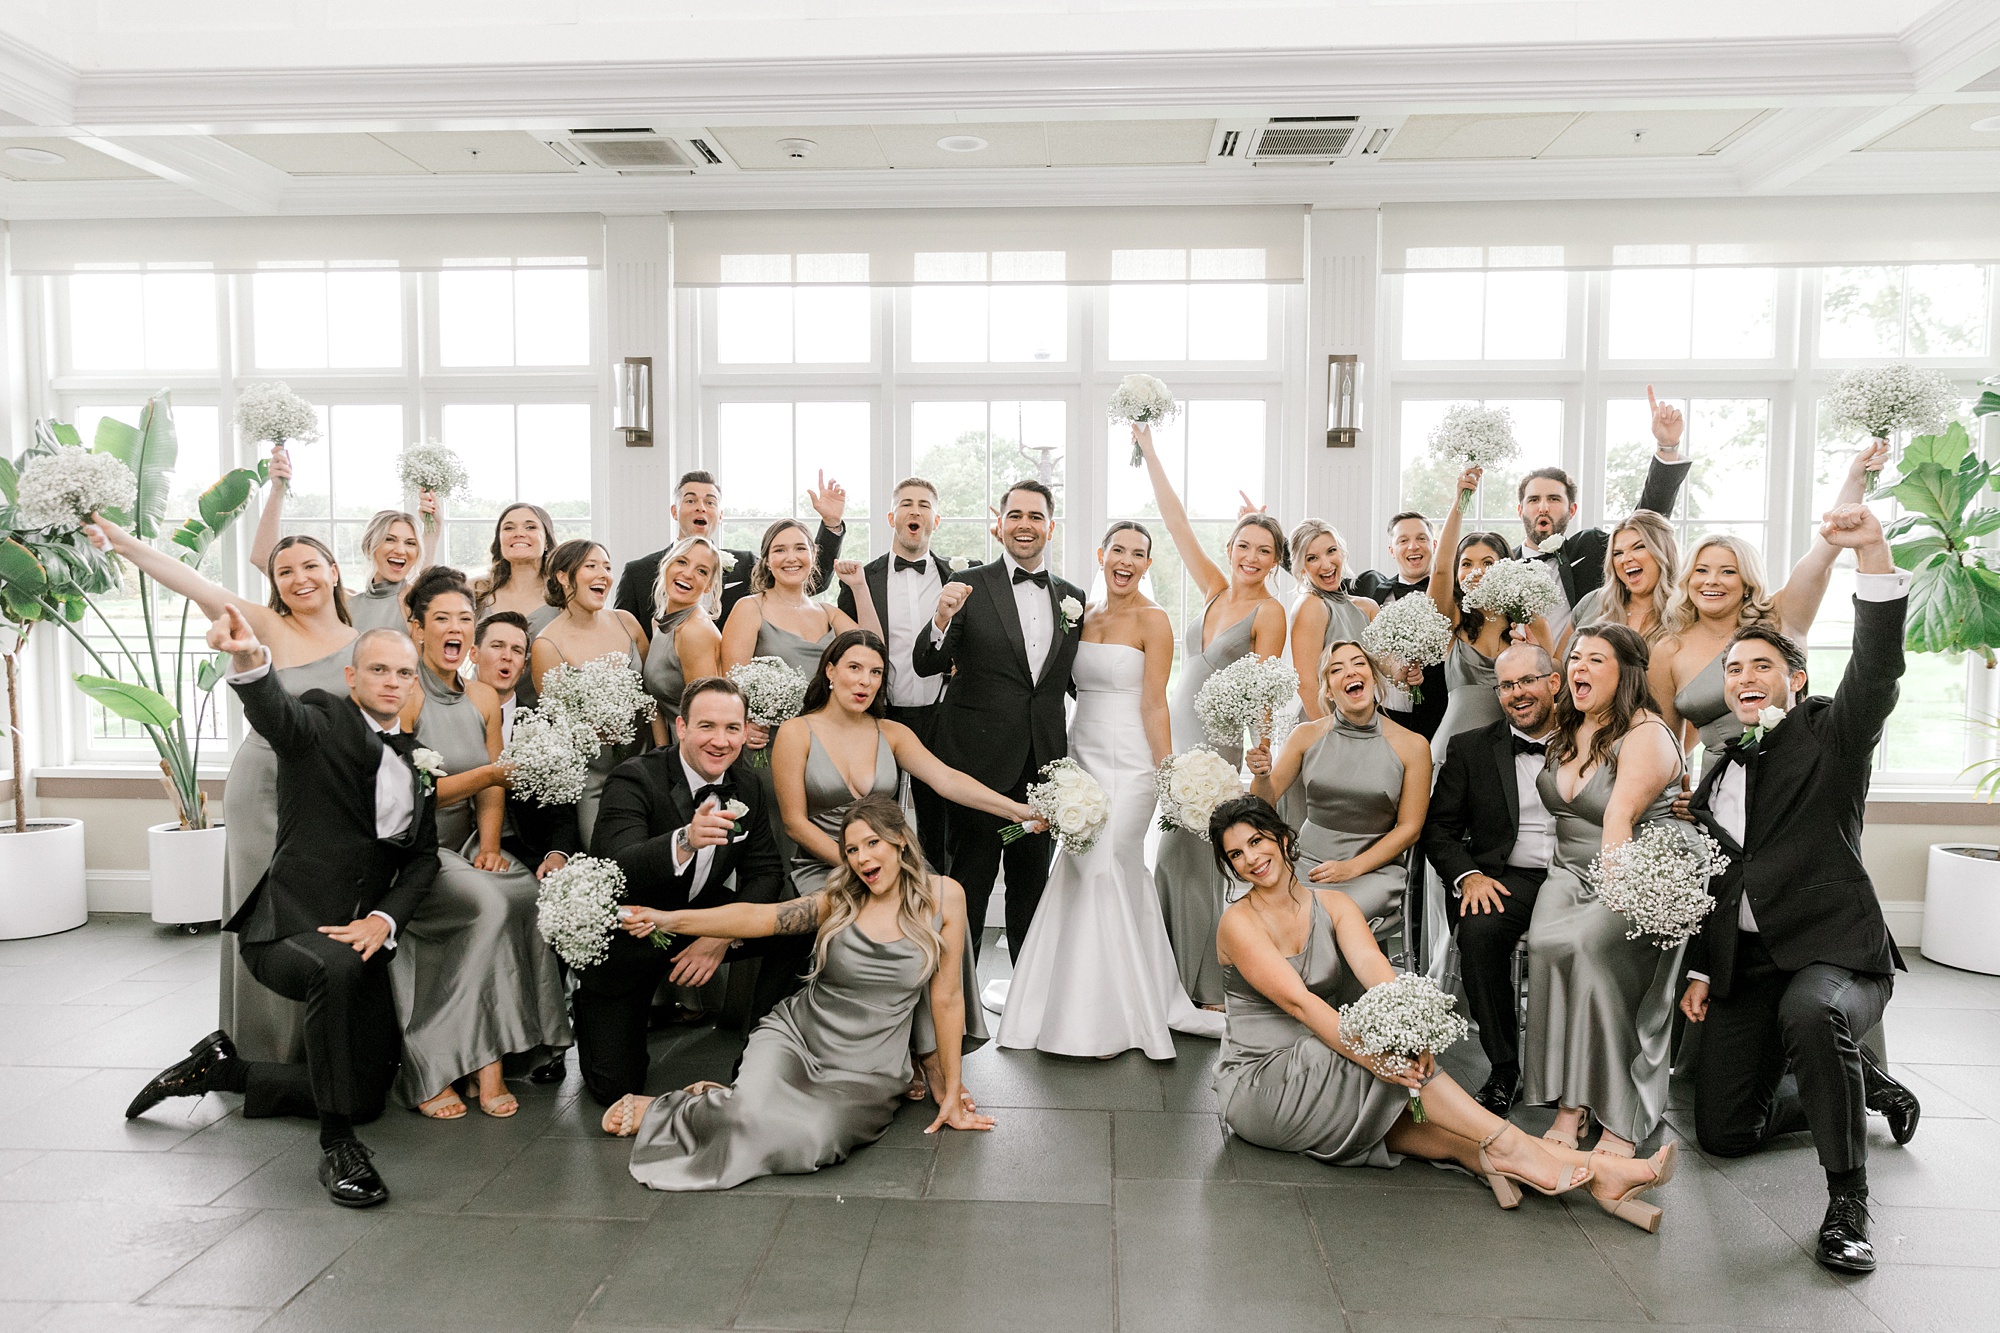 bride and groom cheer with wedding party in sage green and black attire